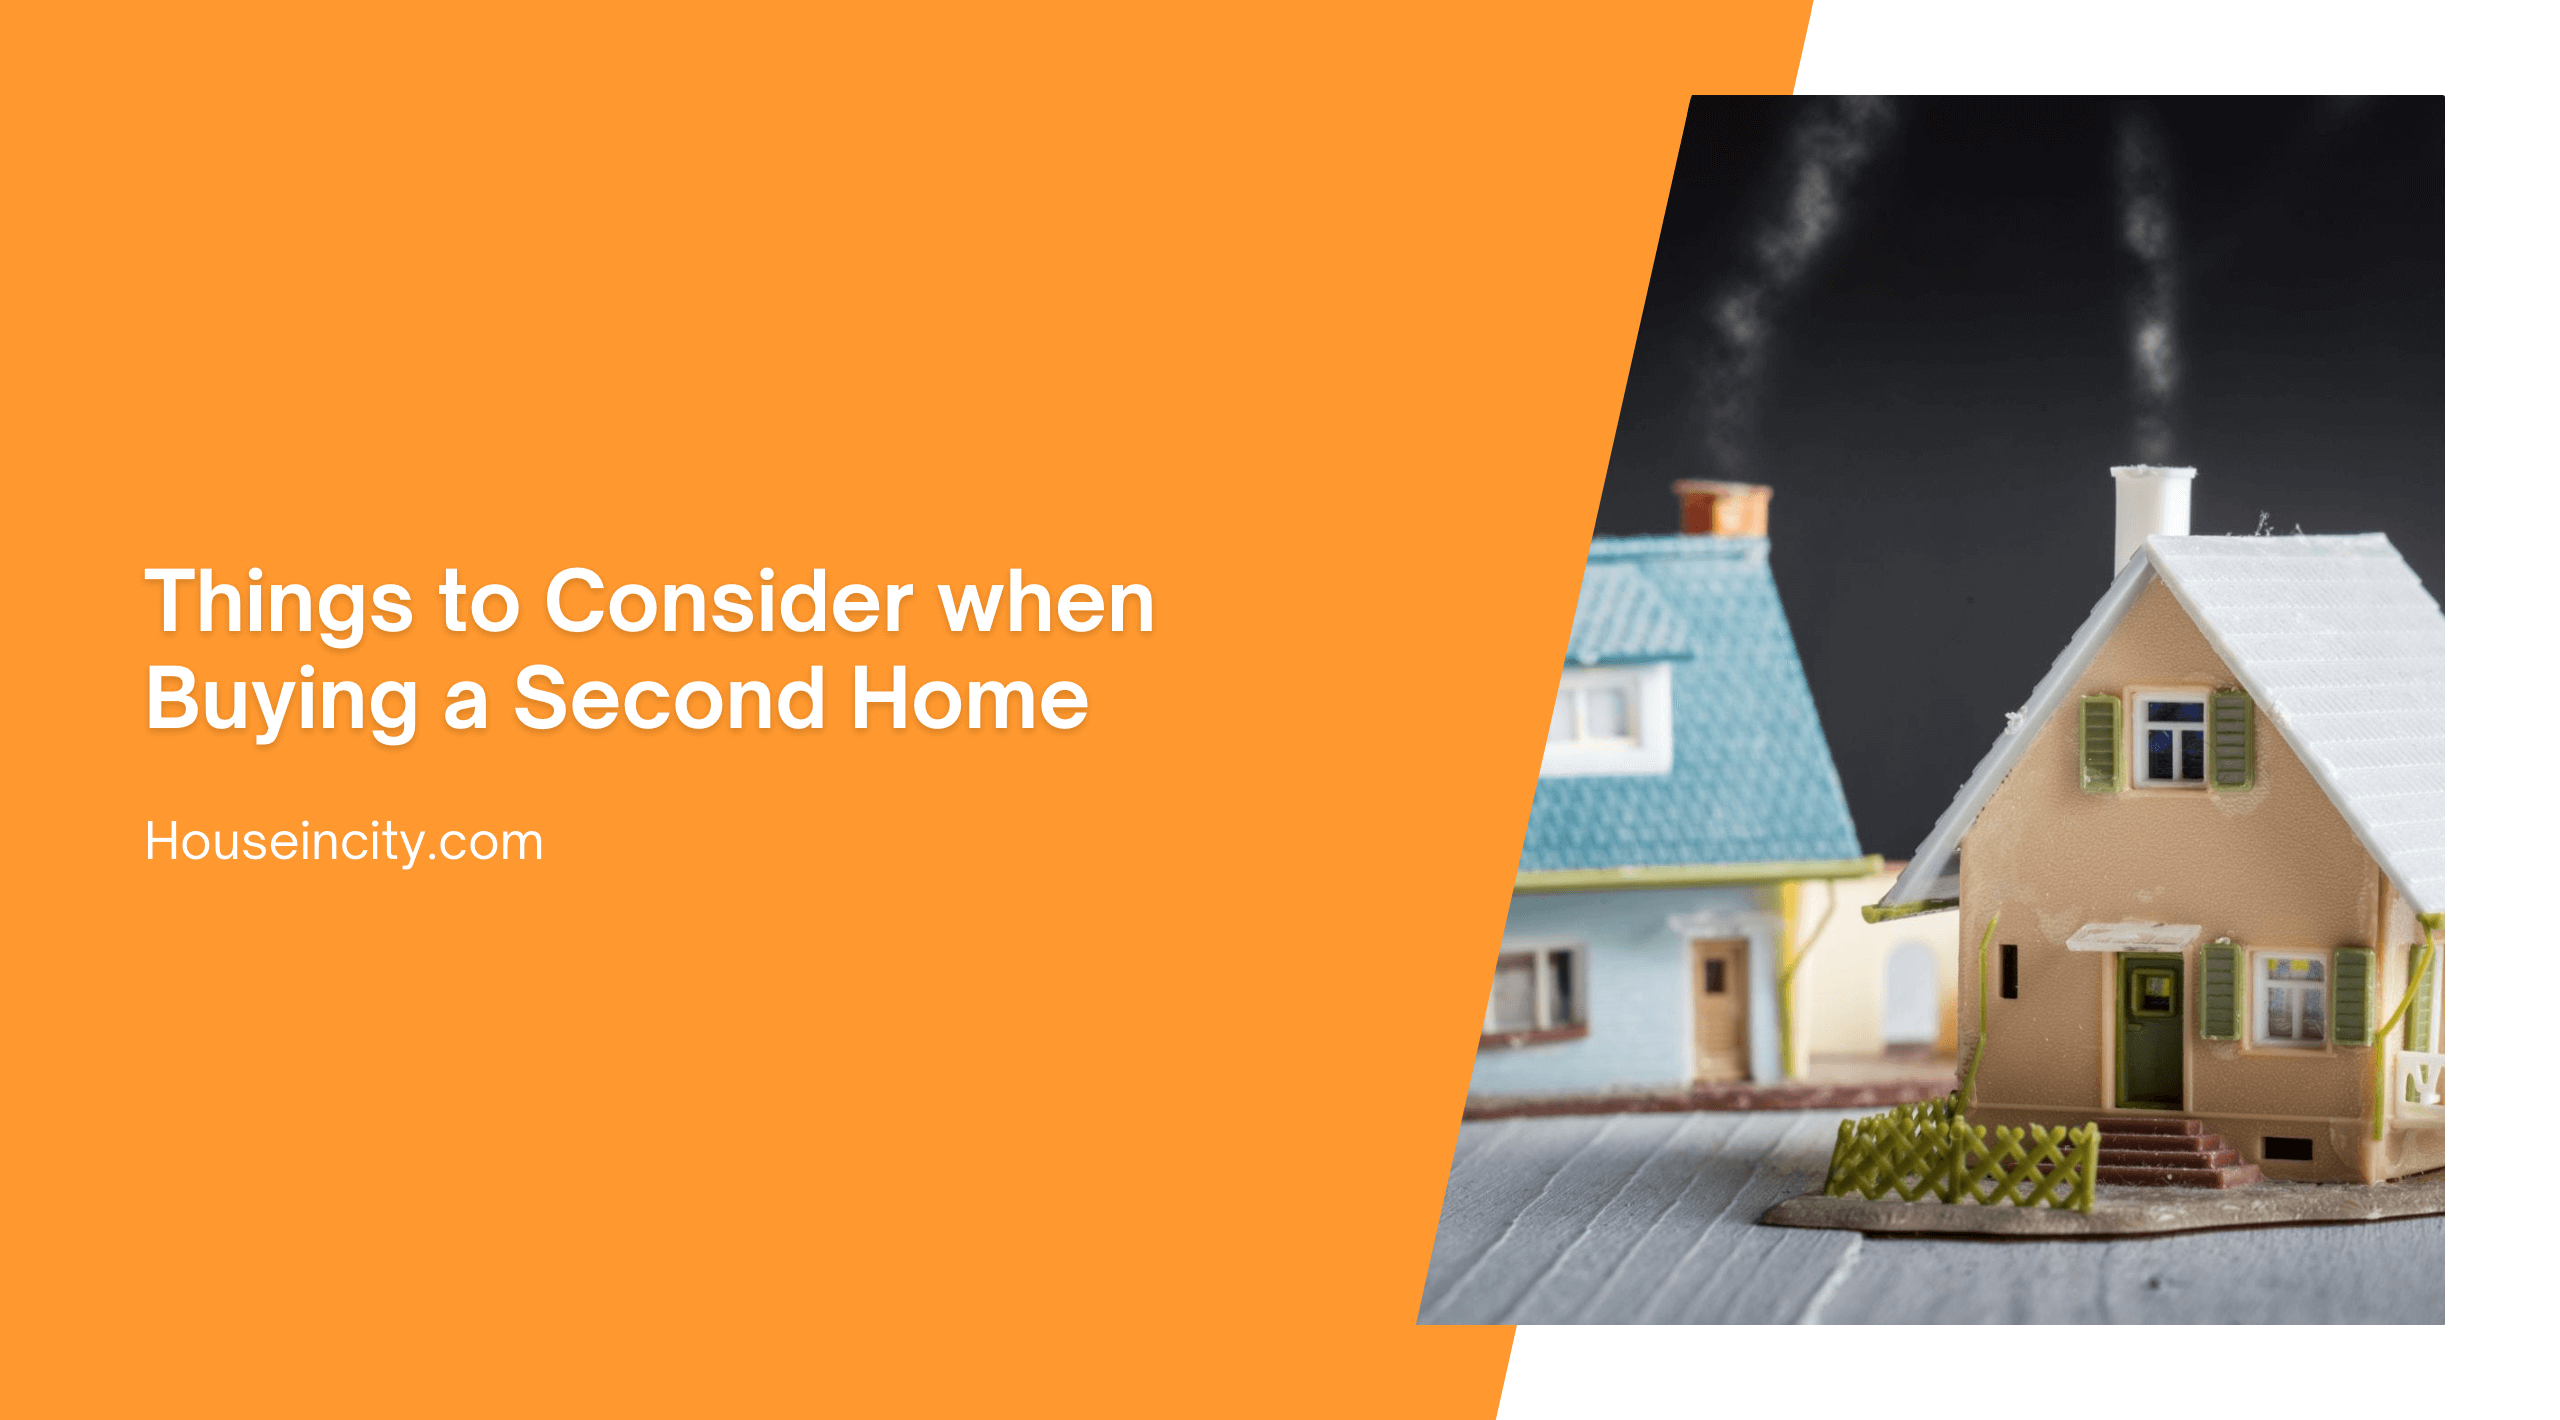 Things to Consider when Buying a Second Home